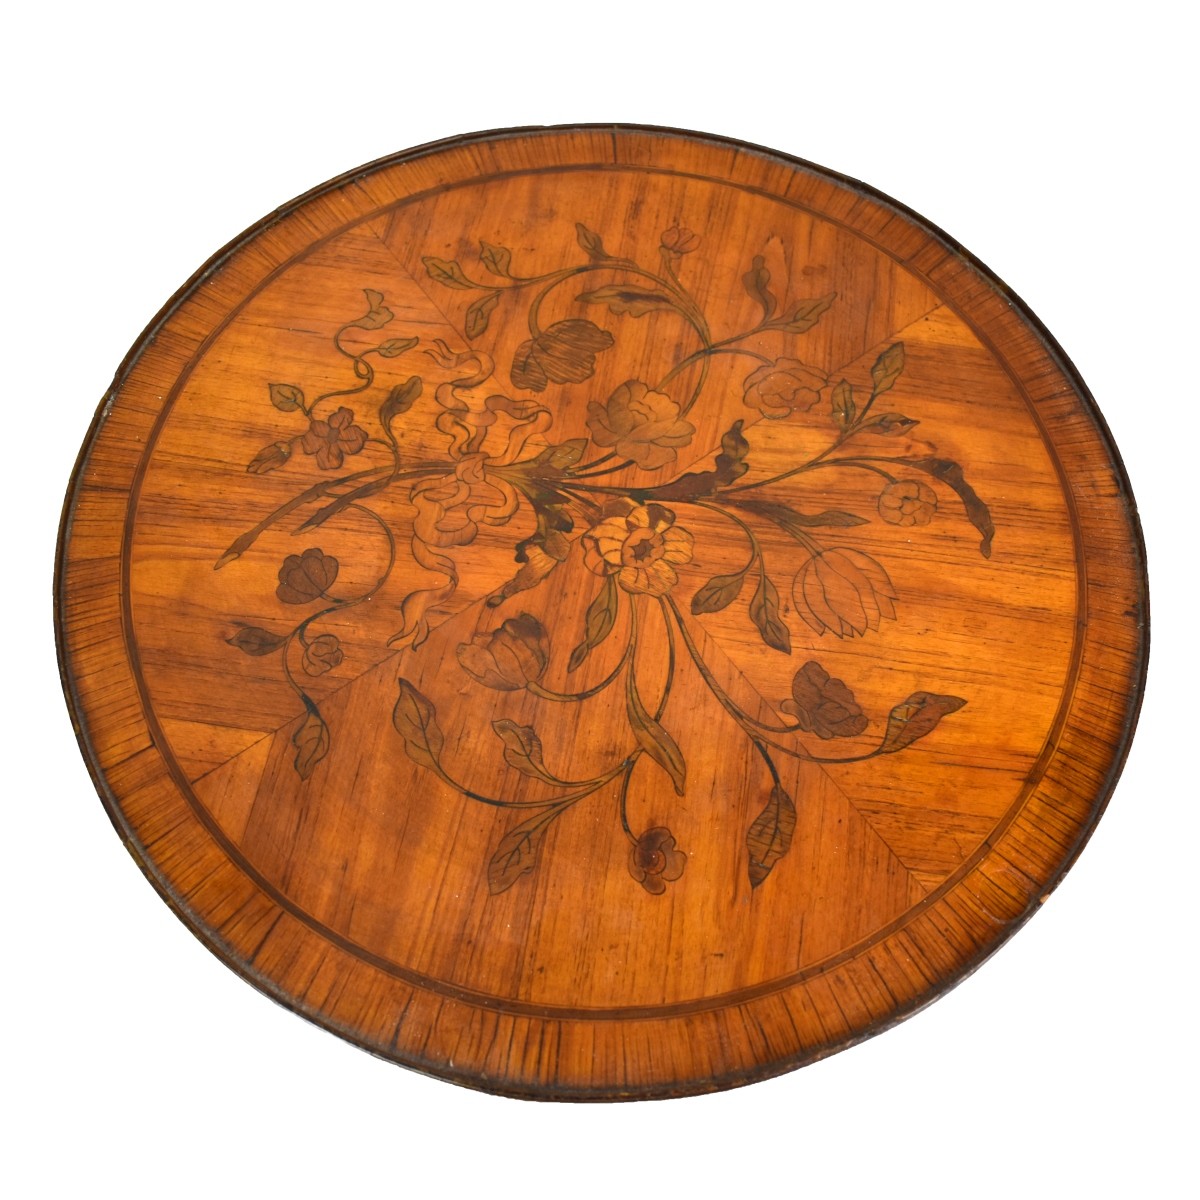 19/20th C. French Marquetry Inlaid Gueridon